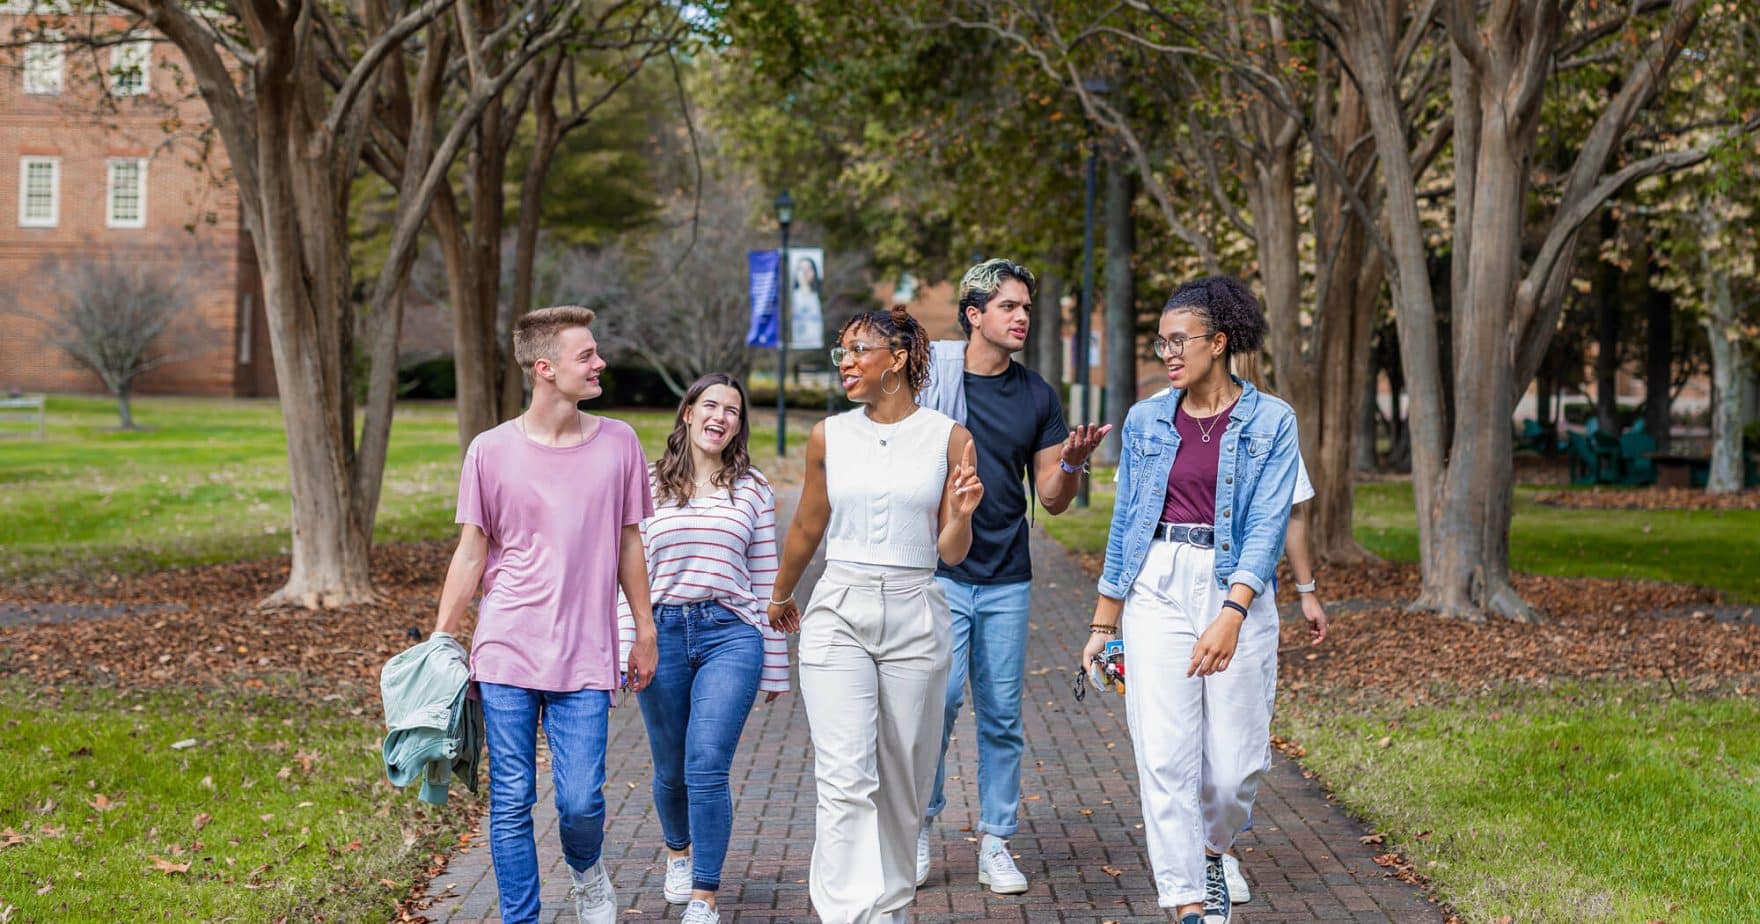 Discover what to wear on a college tour at Regent University.